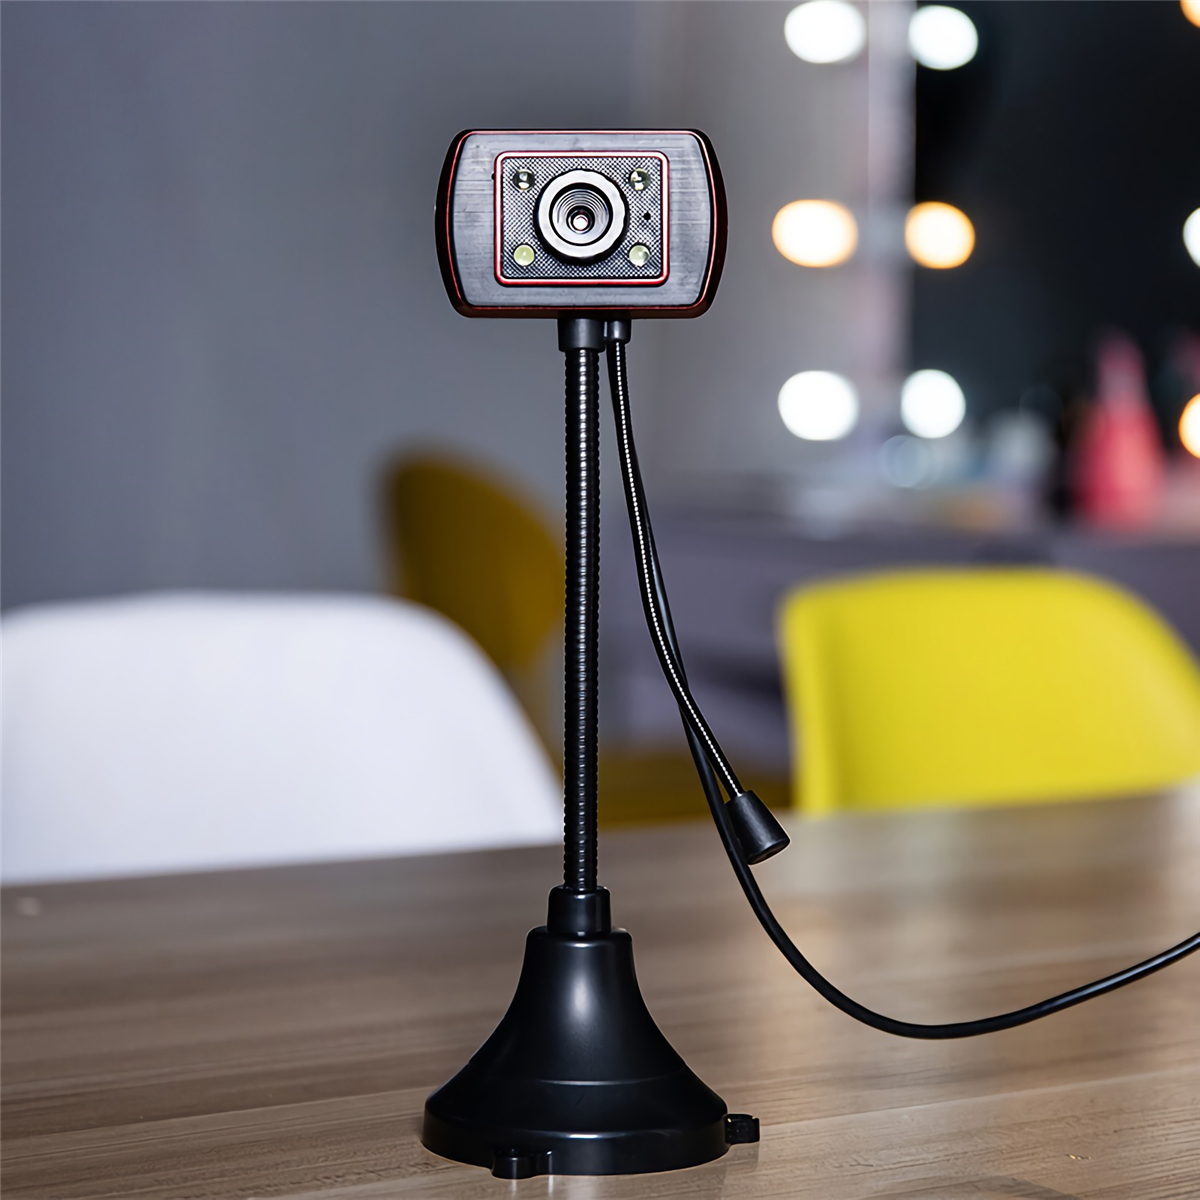 Find S620 480P HD Webcam CMOS USB 2.0 Wired Computer Web Camera Built-in Microphone Camera for Desktop Computer Notebook PC for Sale on Gipsybee.com with cryptocurrencies